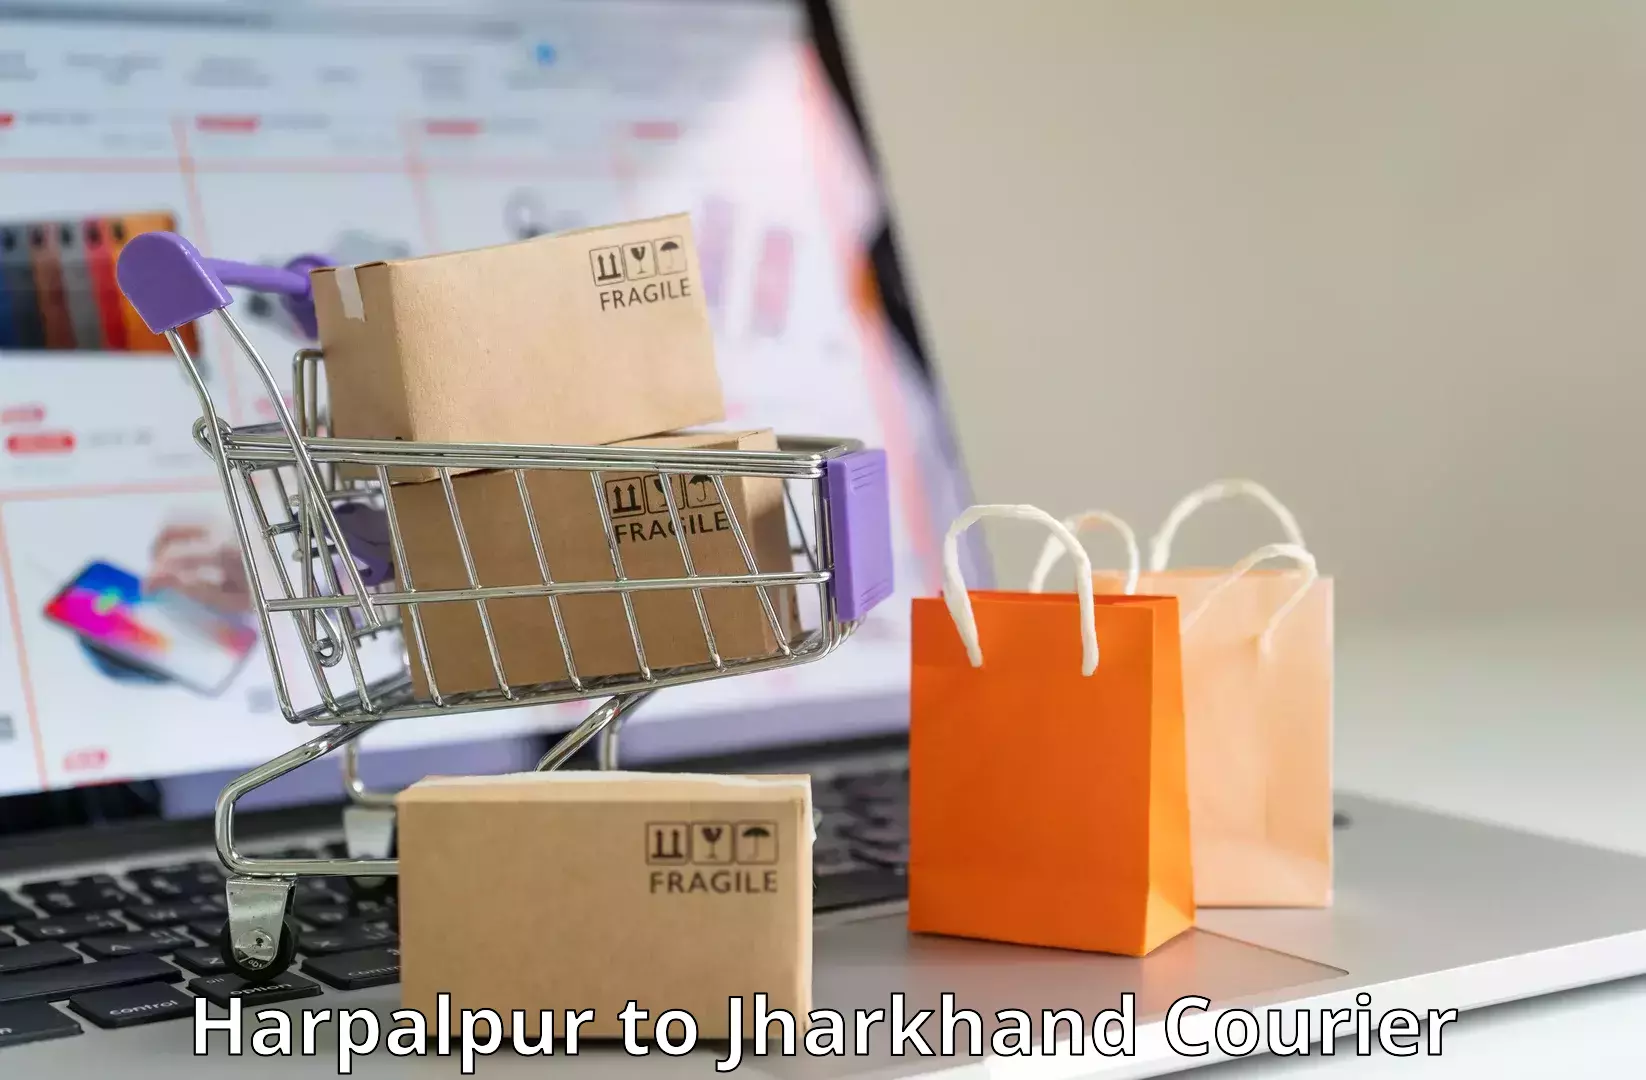 High-capacity parcel service Harpalpur to Jharkhand